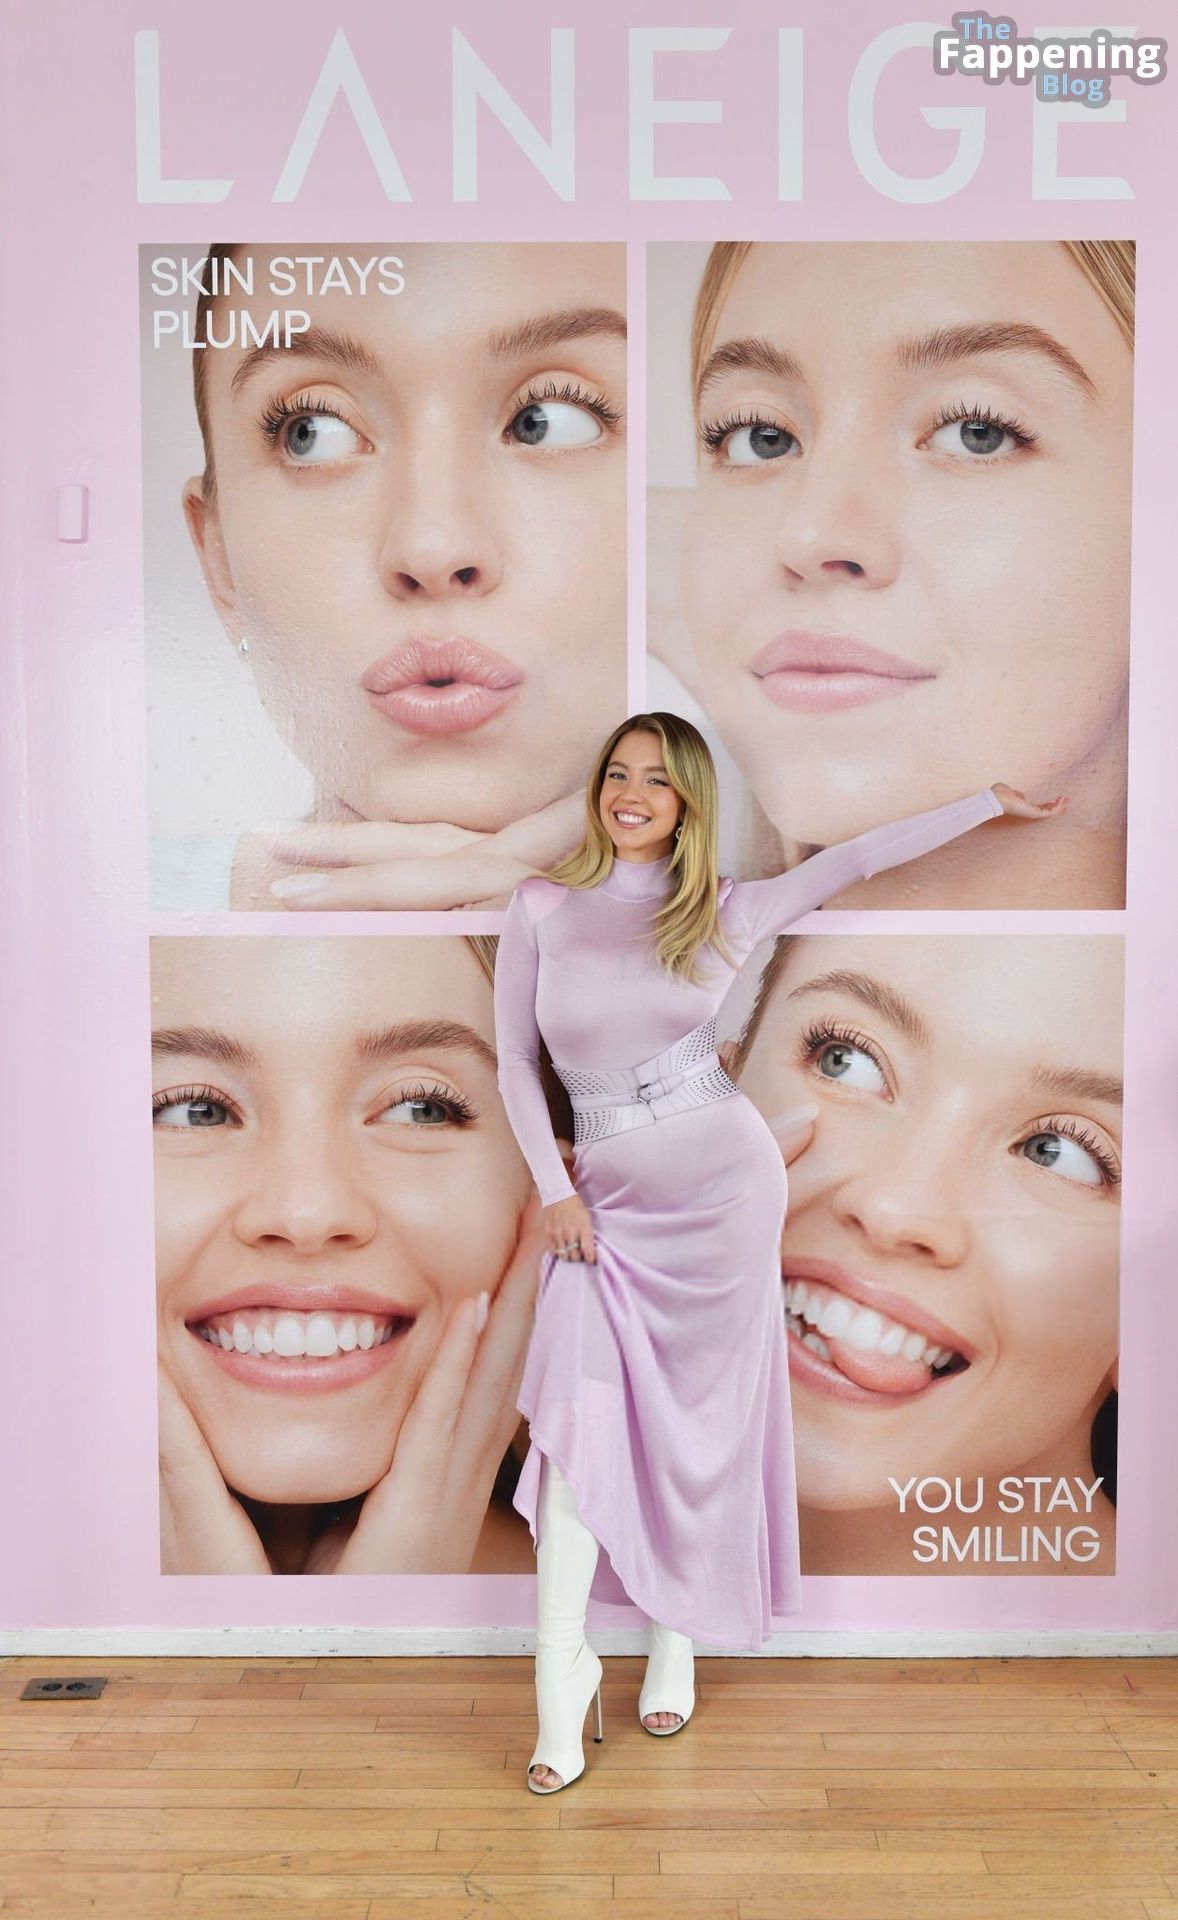 Sydney Sweeney Looks Pretty at the Laneige Launch Event (15 Photos)